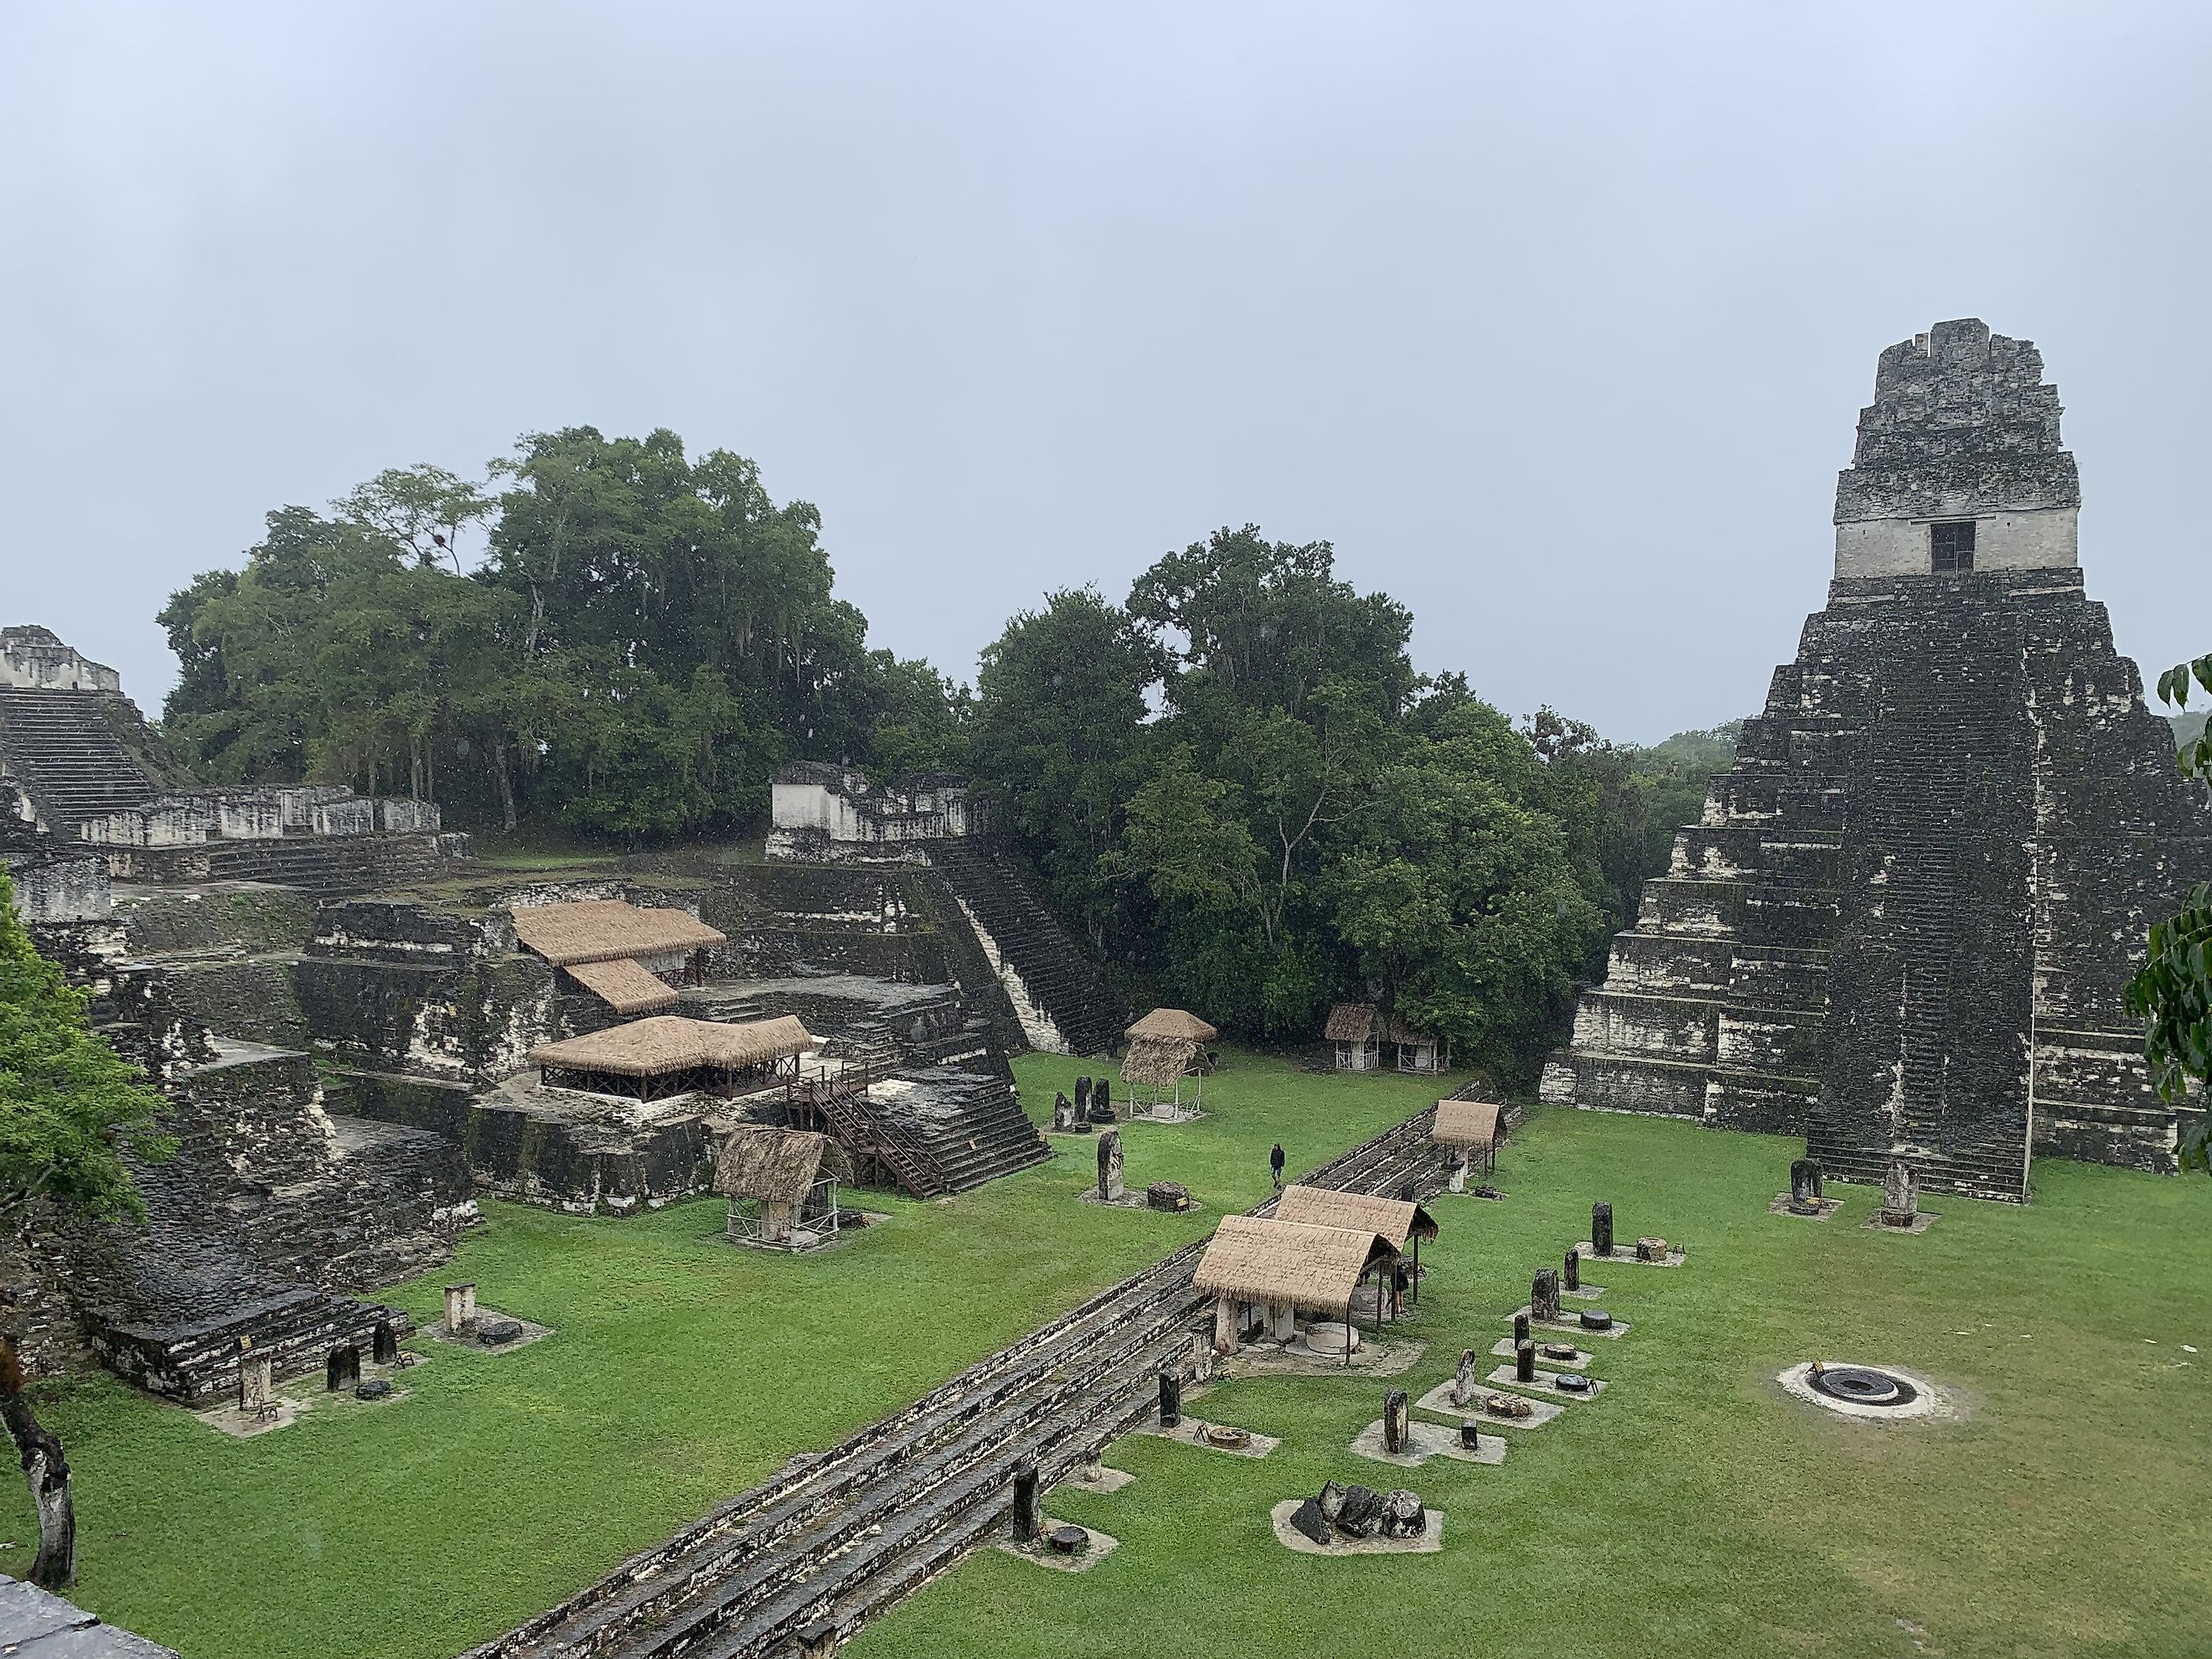 The ruins of the ancient Mayan city known as Tikal. Photo: Andrew Douglas